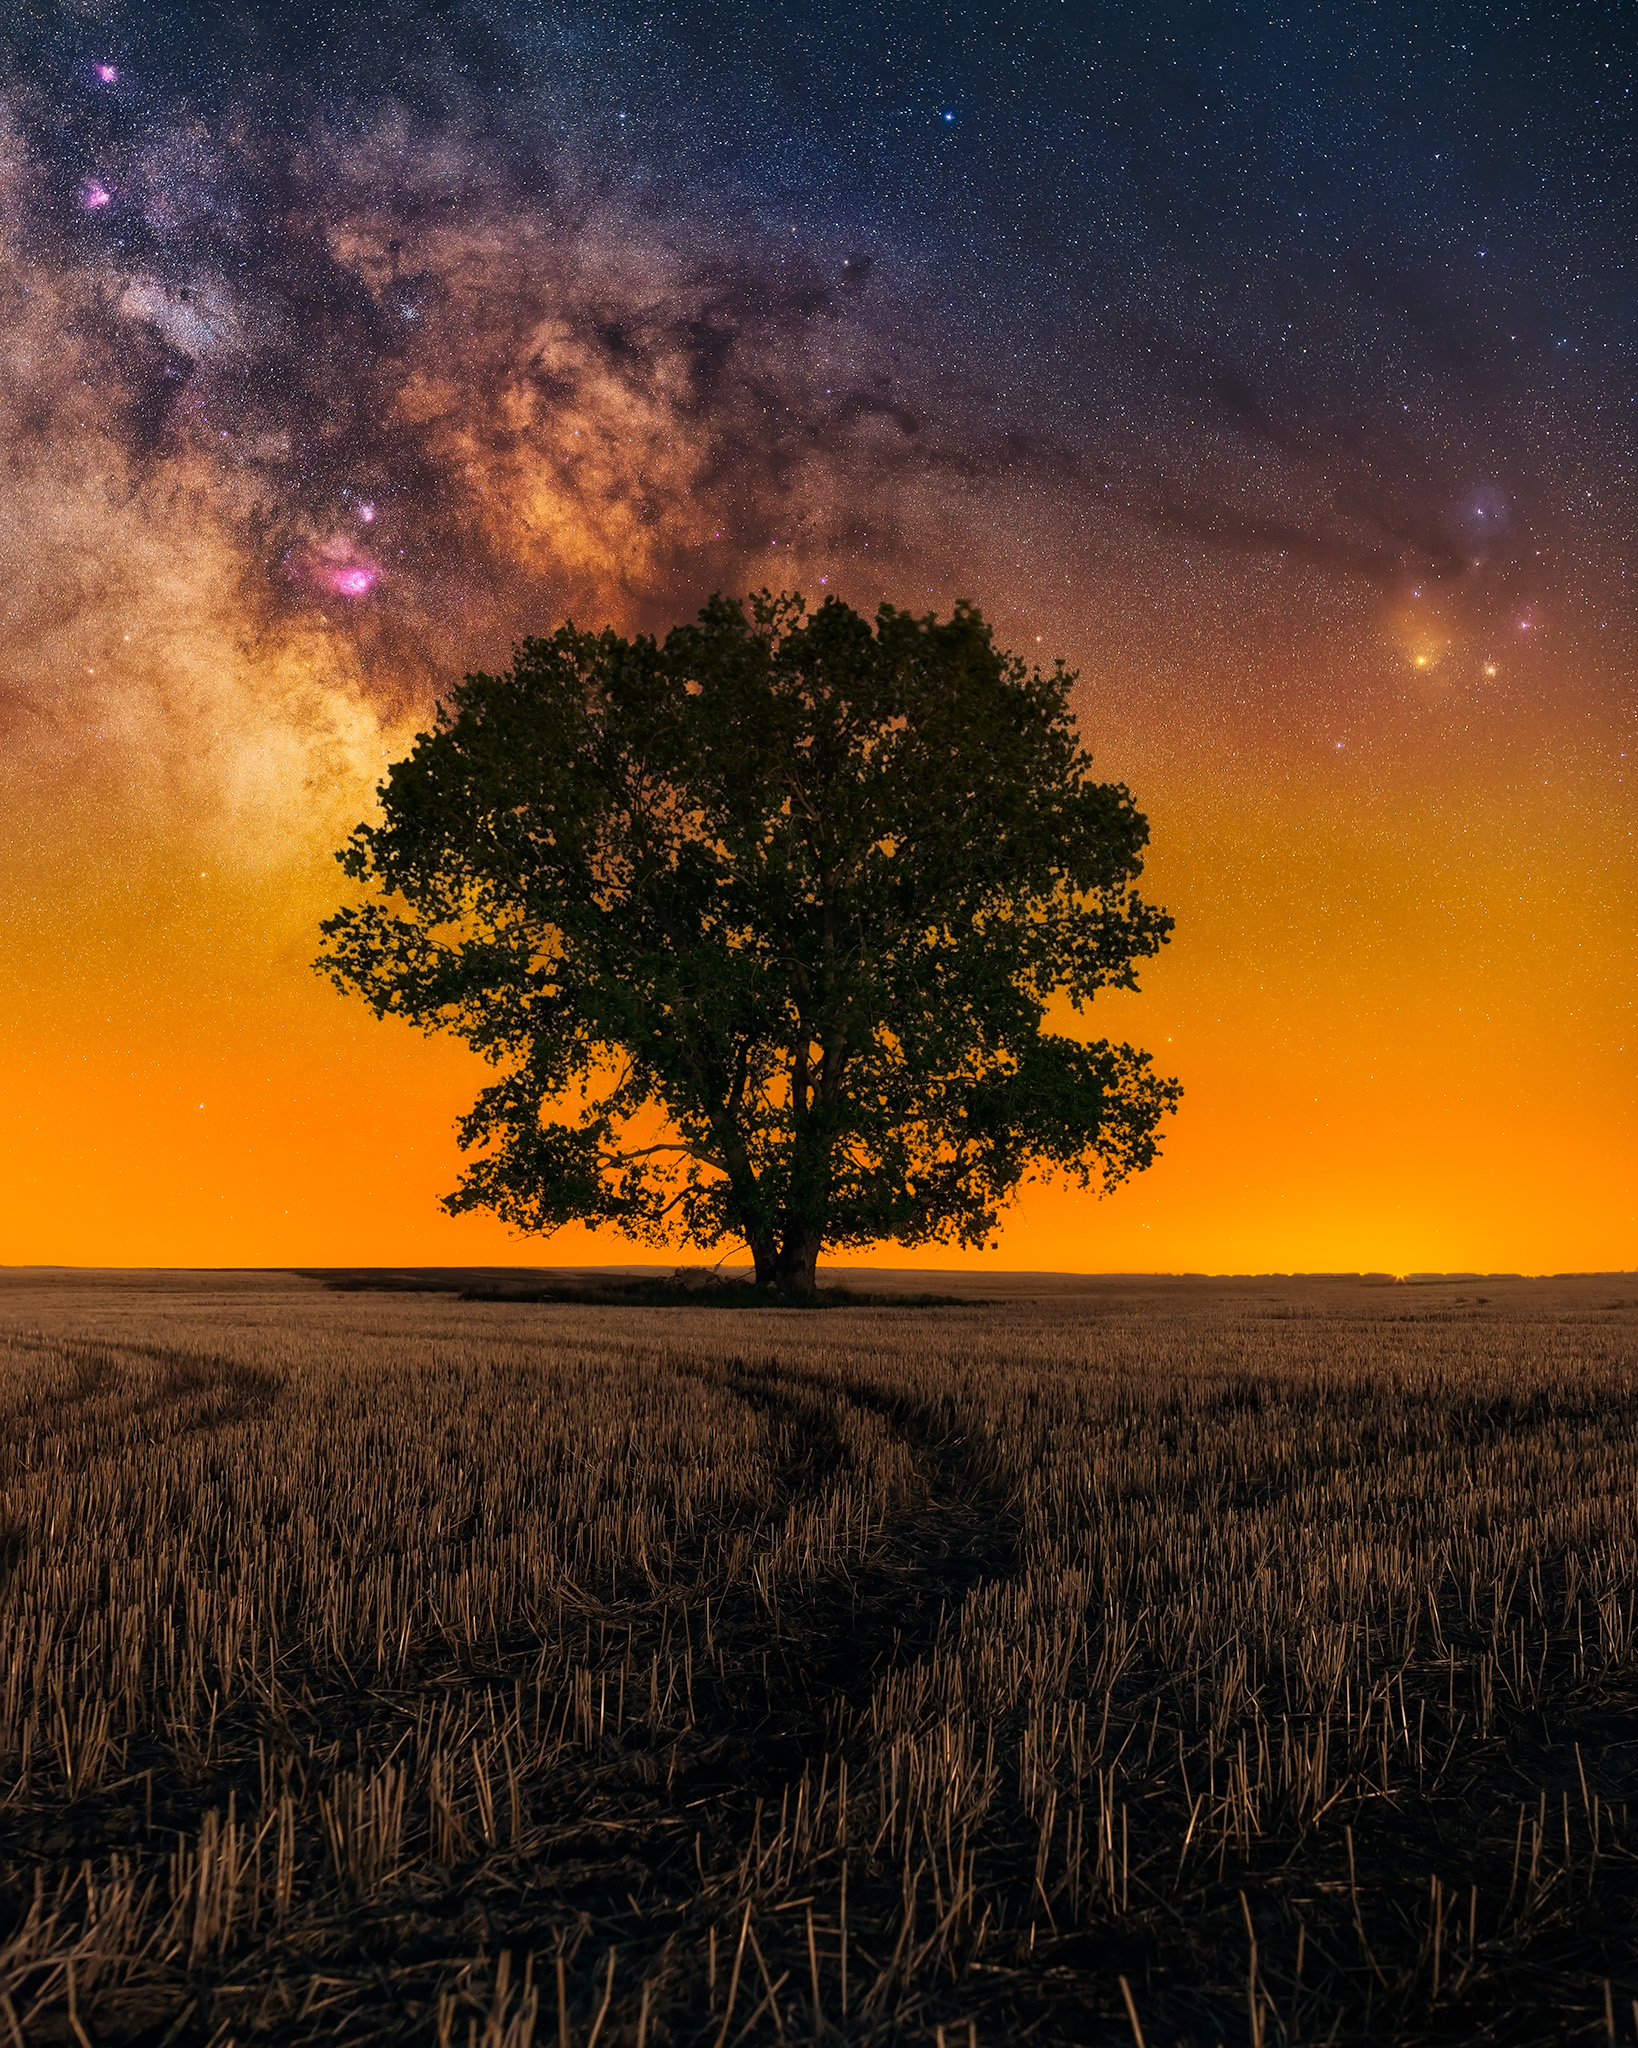 Landscape astrophotography in southeast Saskatchewan. The milky way behind a large tree